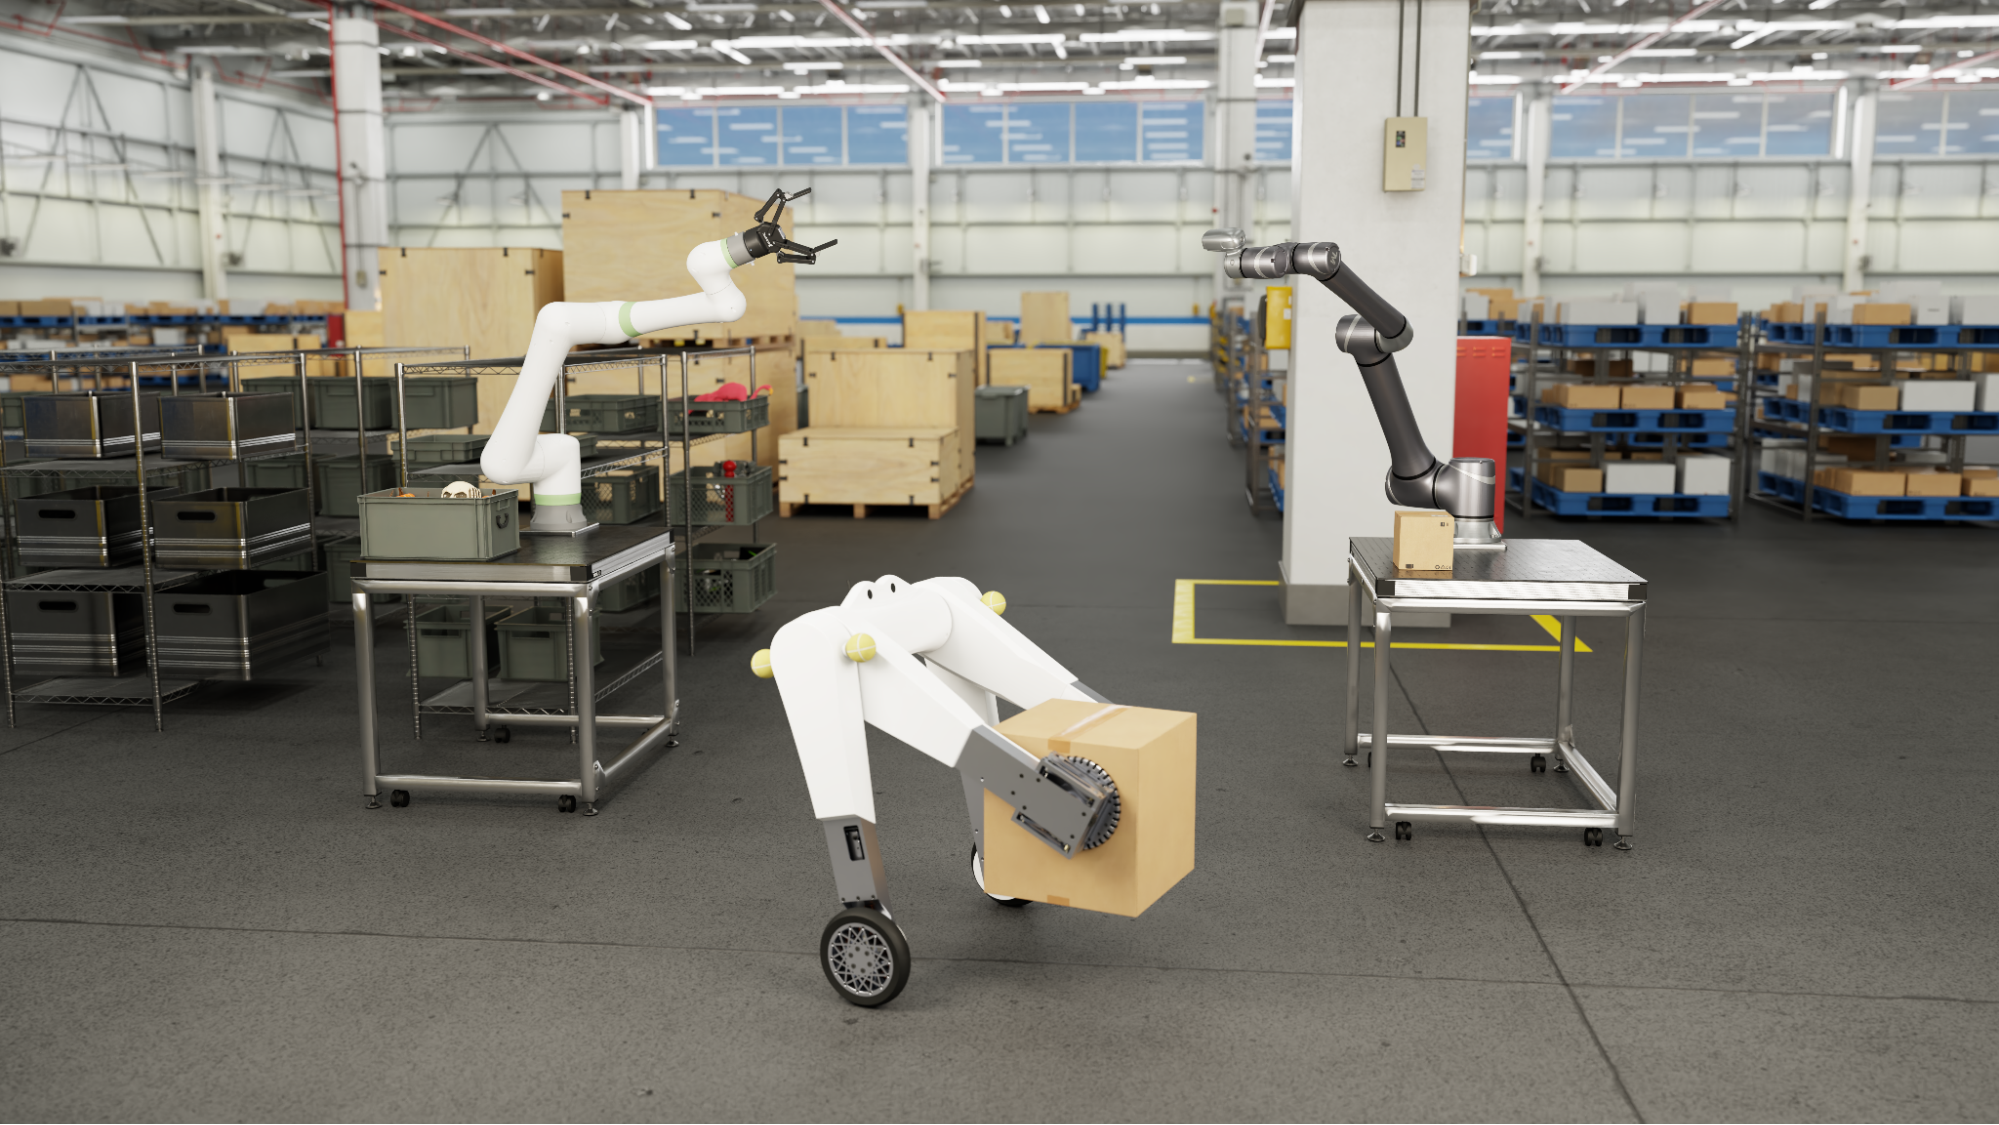 Image of three robot arms in an industrial warehouse setting.
